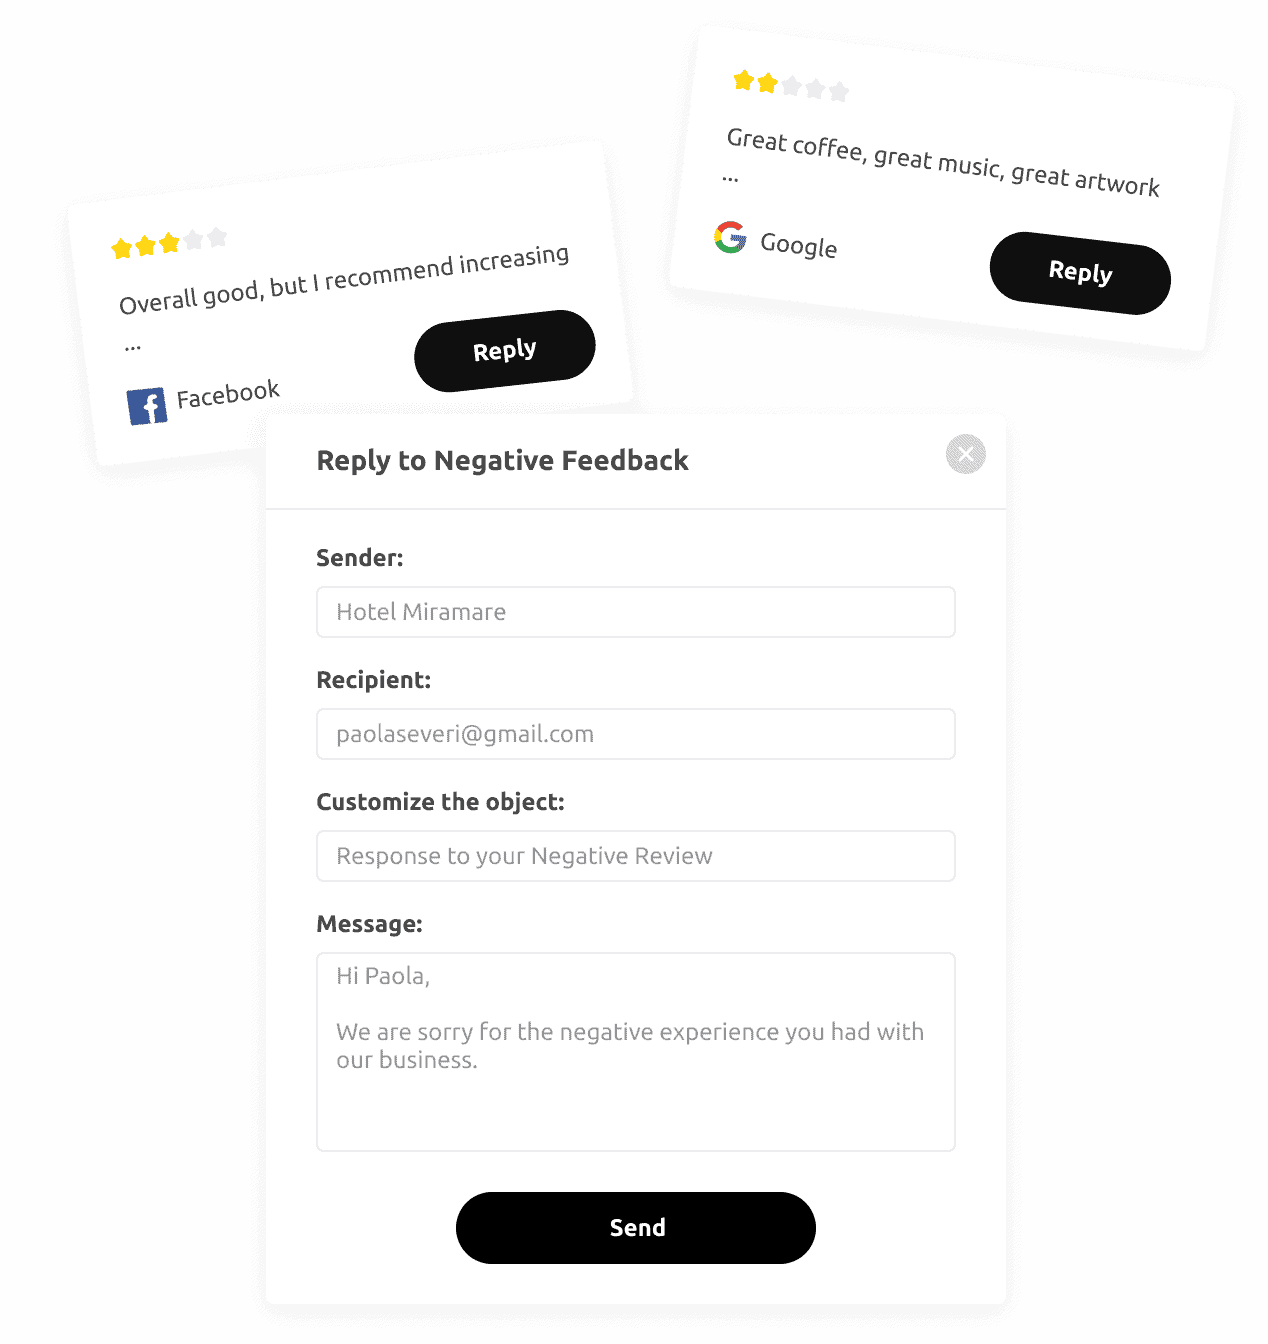 A cost-effective online reputation management solution that includes a set of cards for studying in happiness and giving feedback.